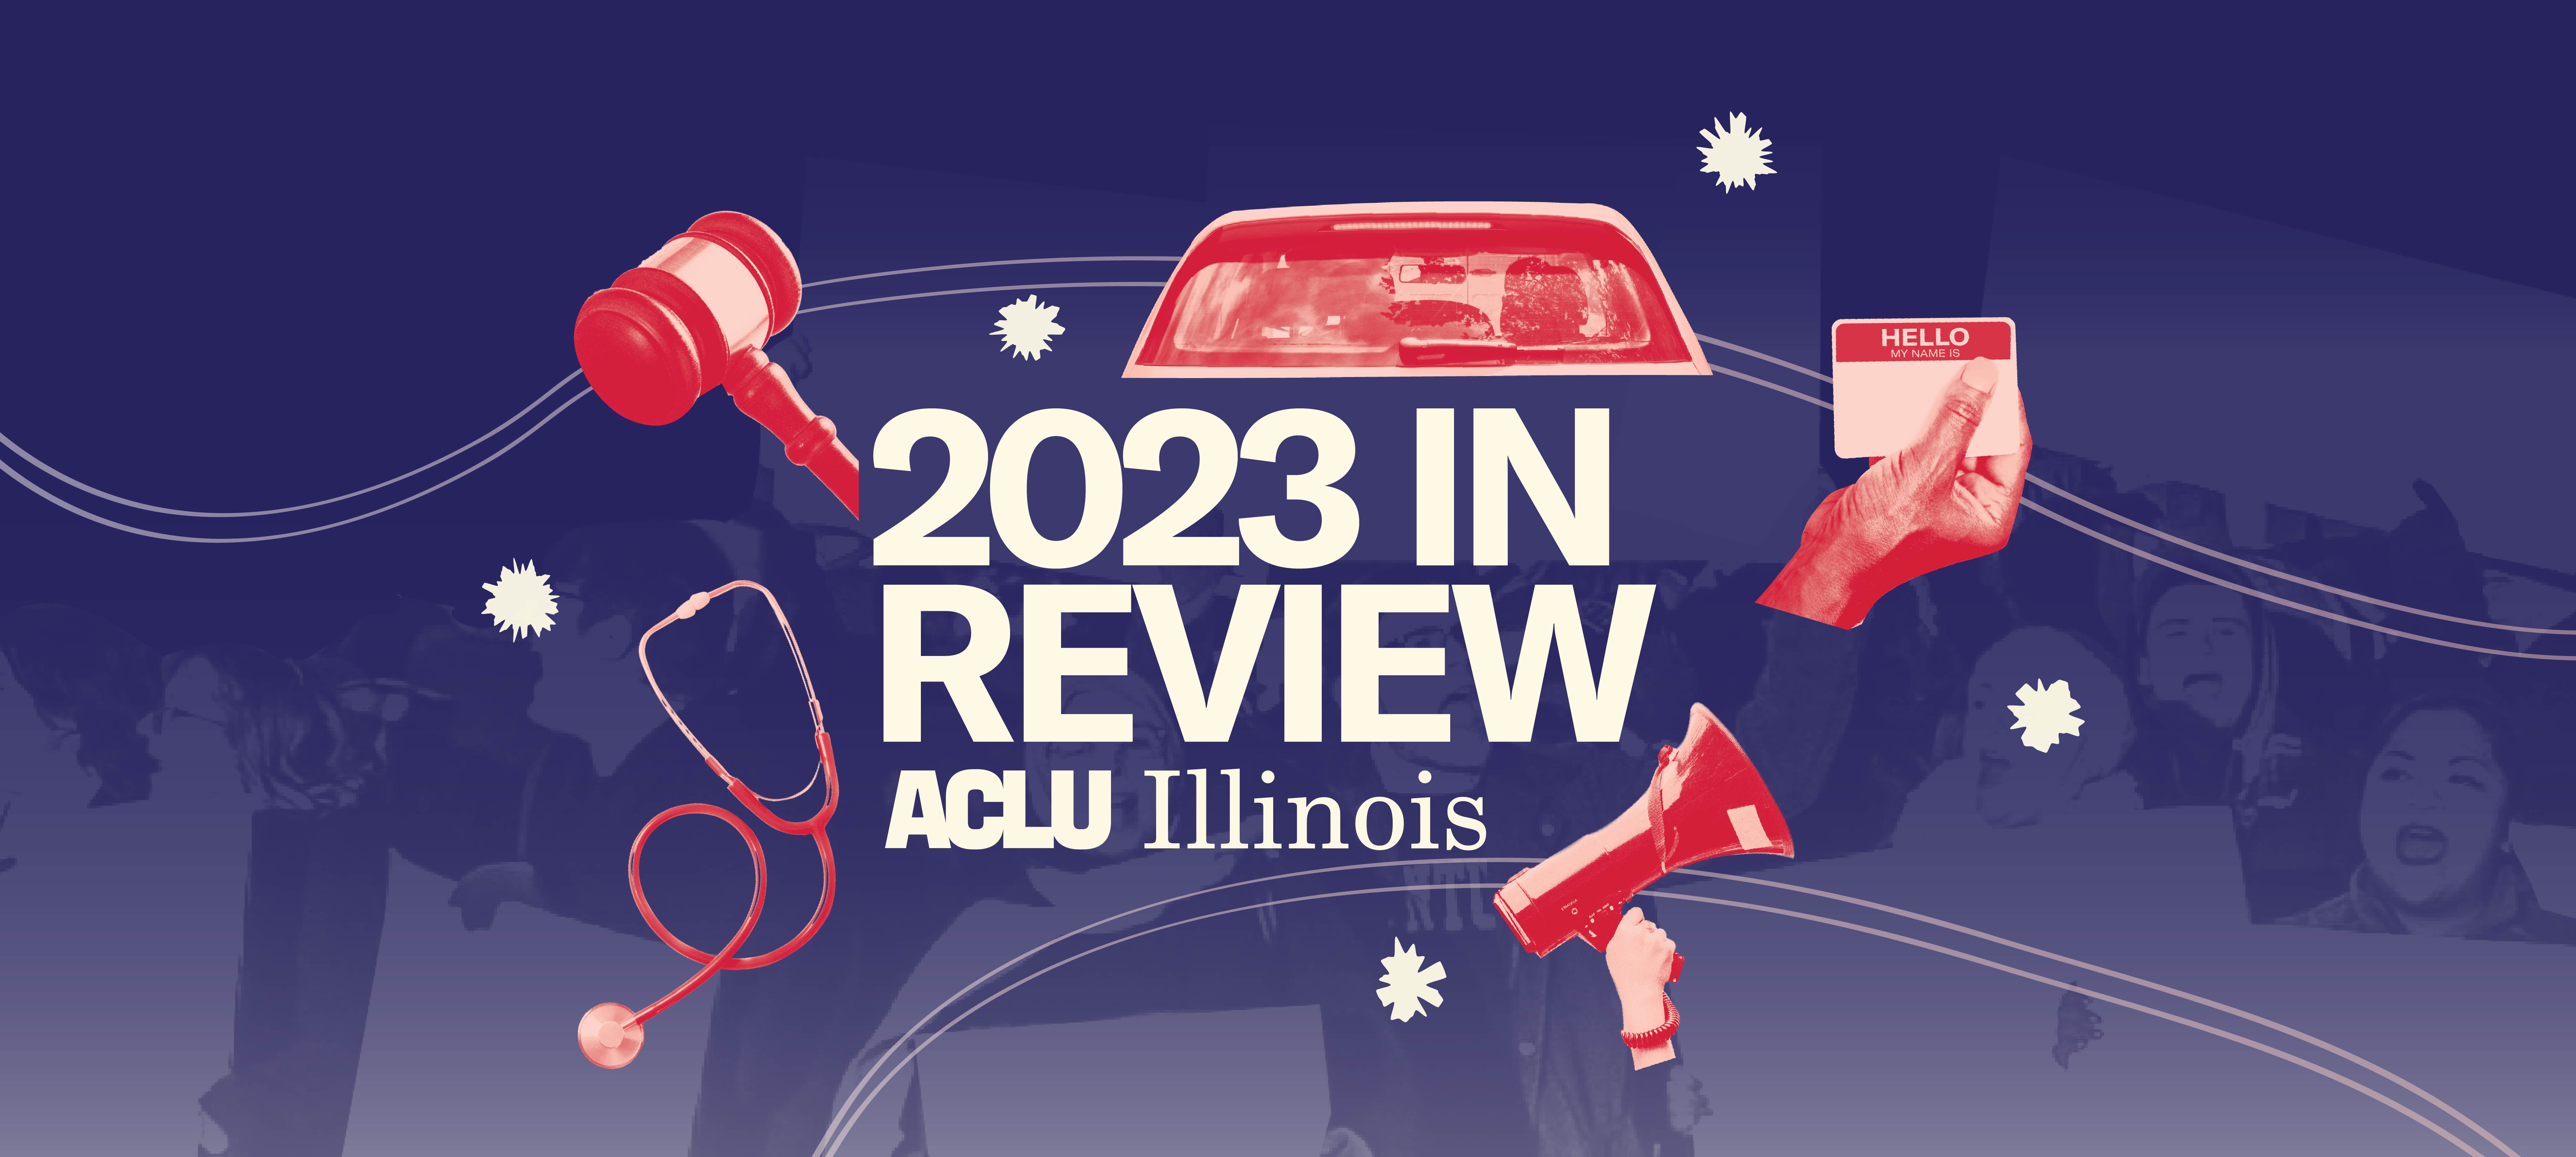 Light Blue background. Blue text "2023 In Review". Pink and red images of a gavel, rear view of a car, hand holding a nametag, megaphone, and stethoscope. 